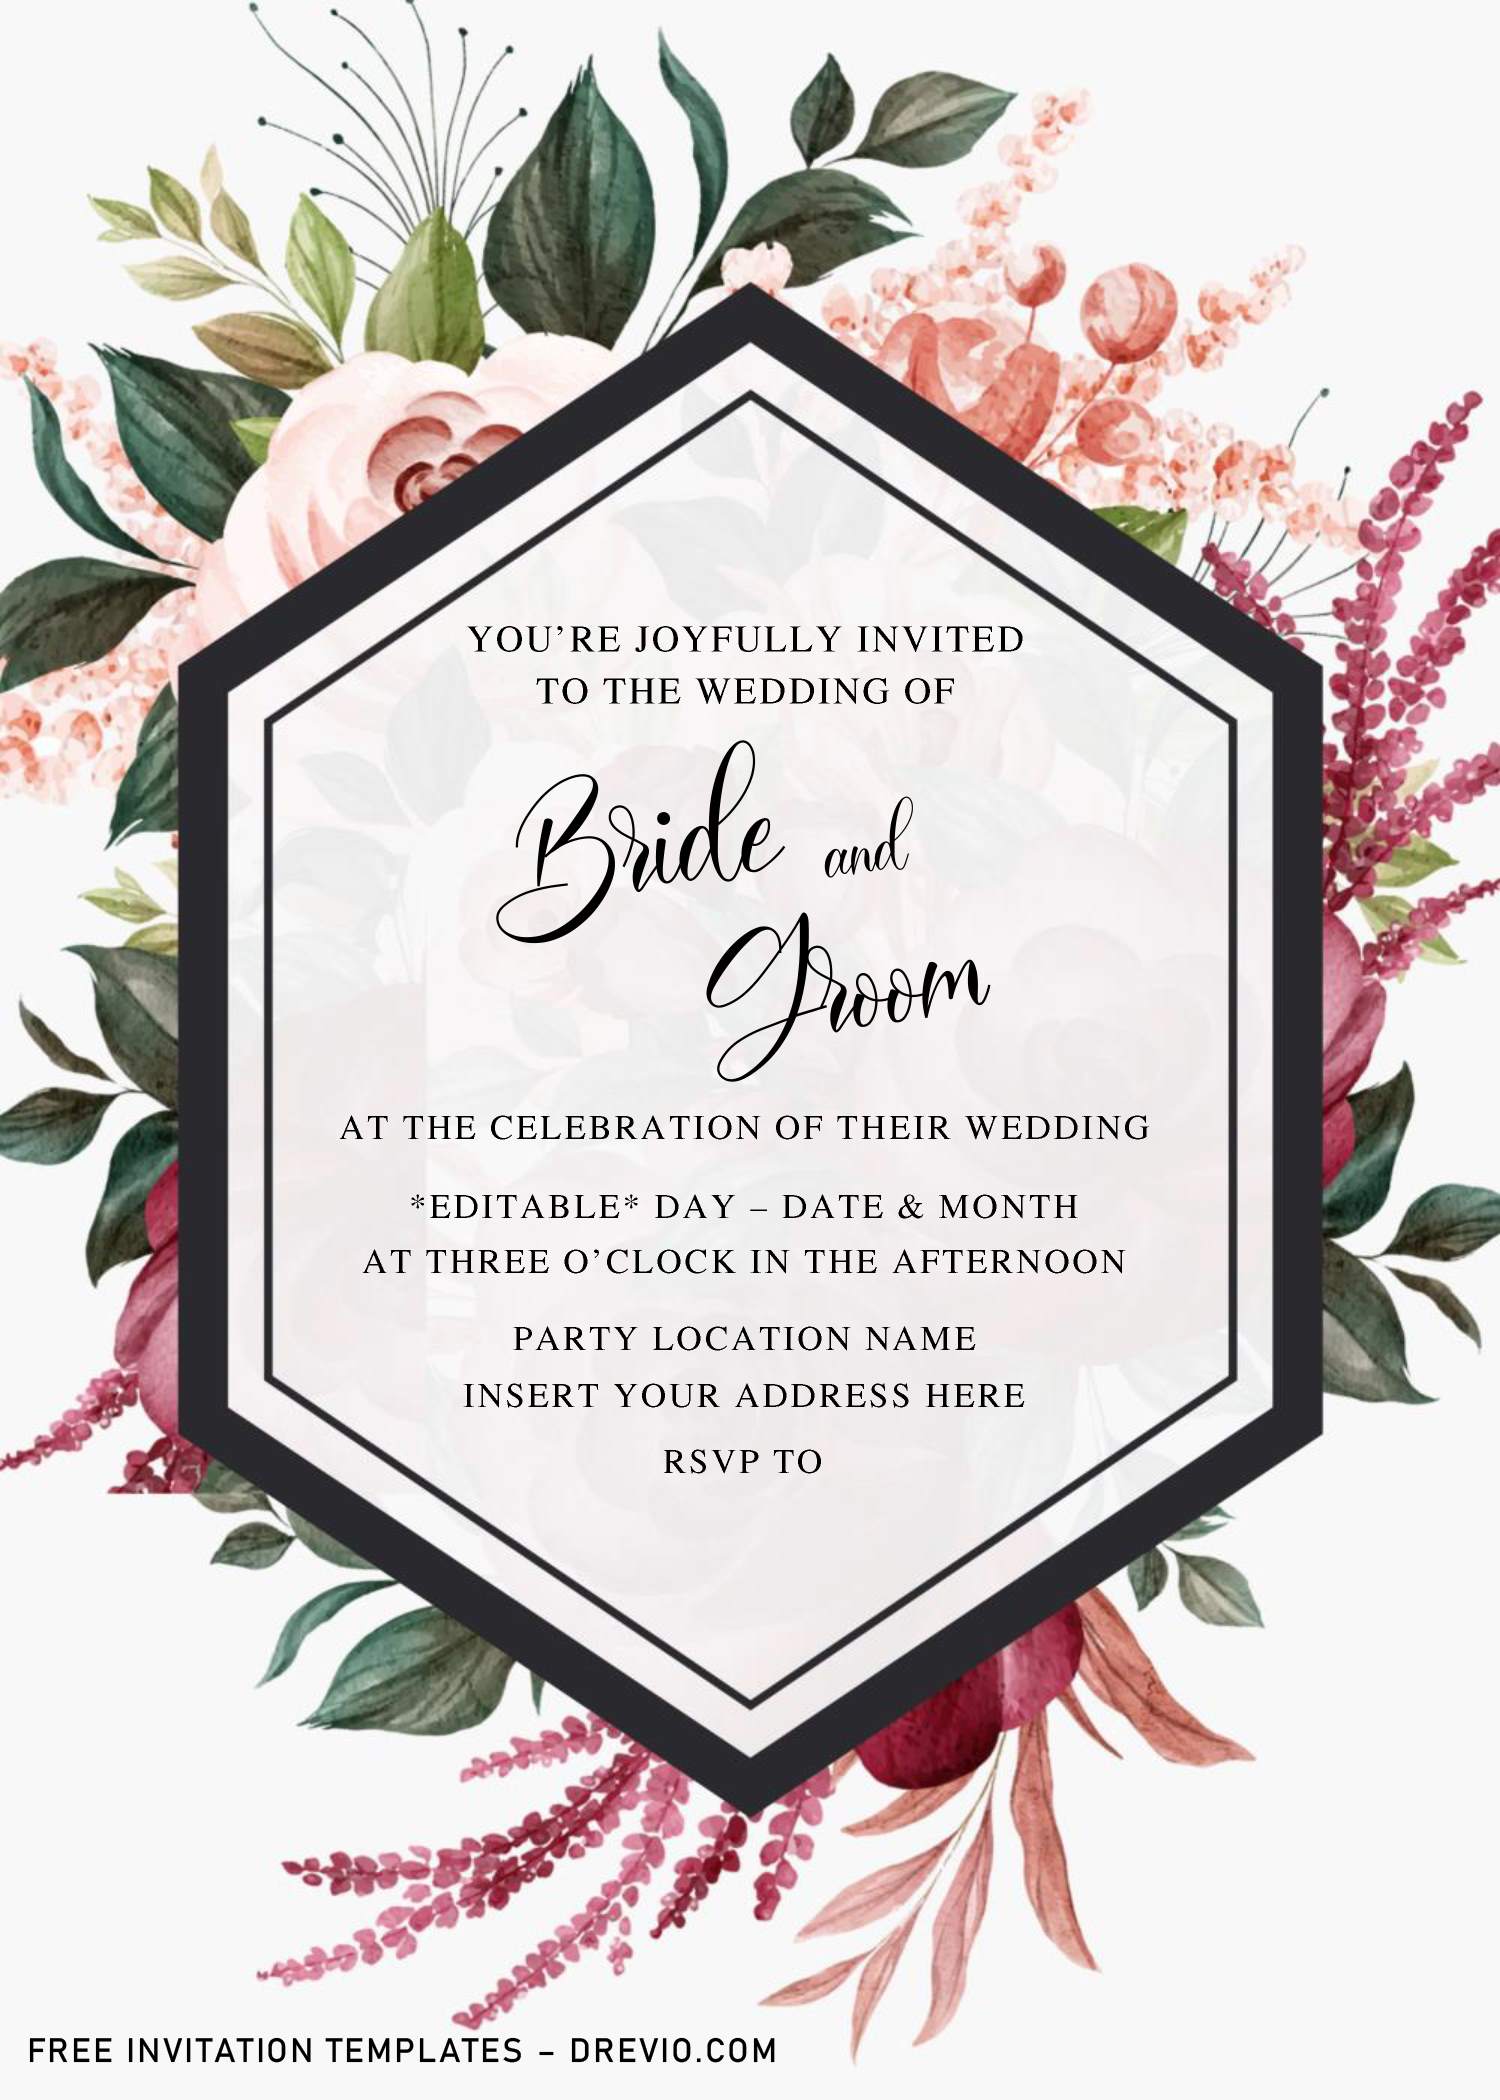 Free Burgundy Floral Wedding Invitation Templates For Word | Download  Hundreds FREE PRINTABLE Birthday Invitation Templates